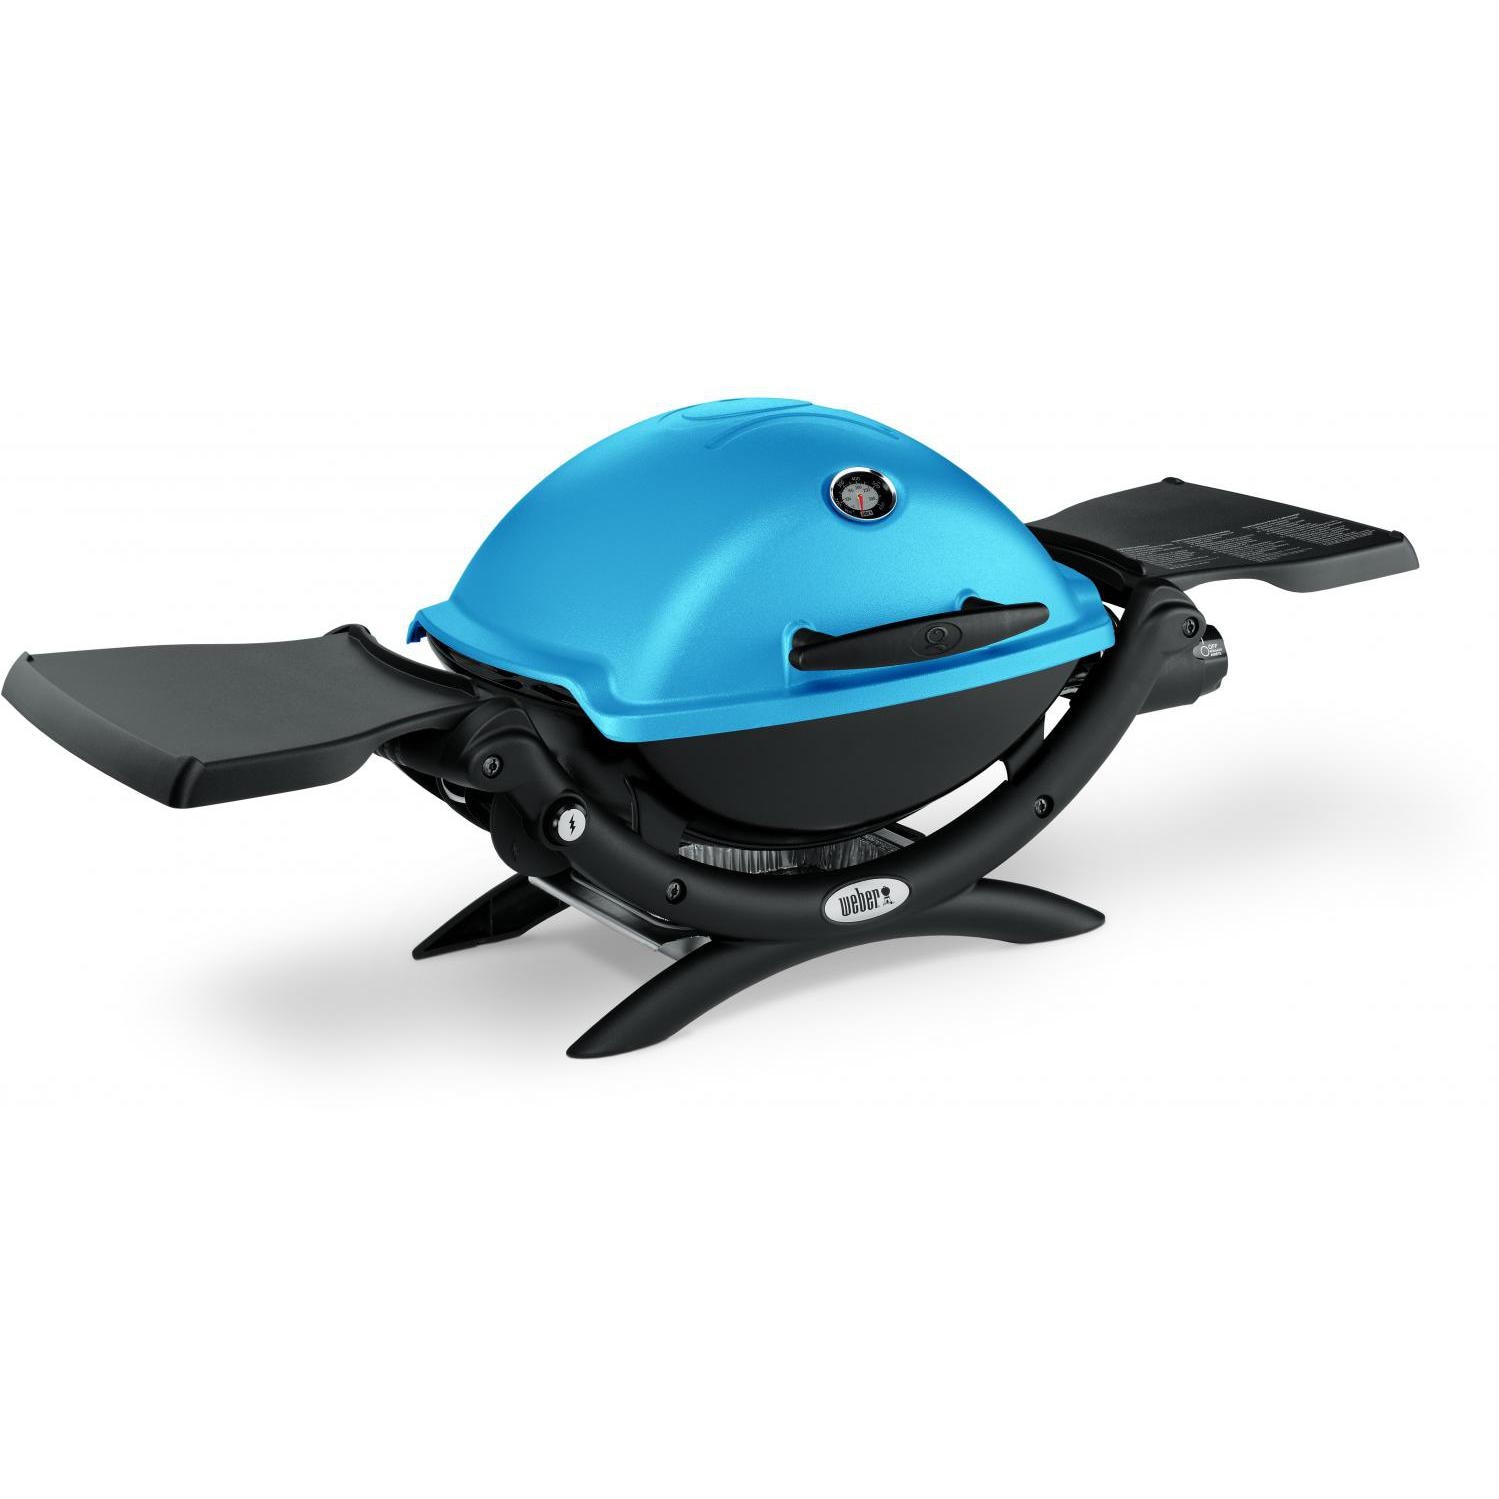 GRILL PORTABLE GAS Q 1200 BLUE - image 4 of 6